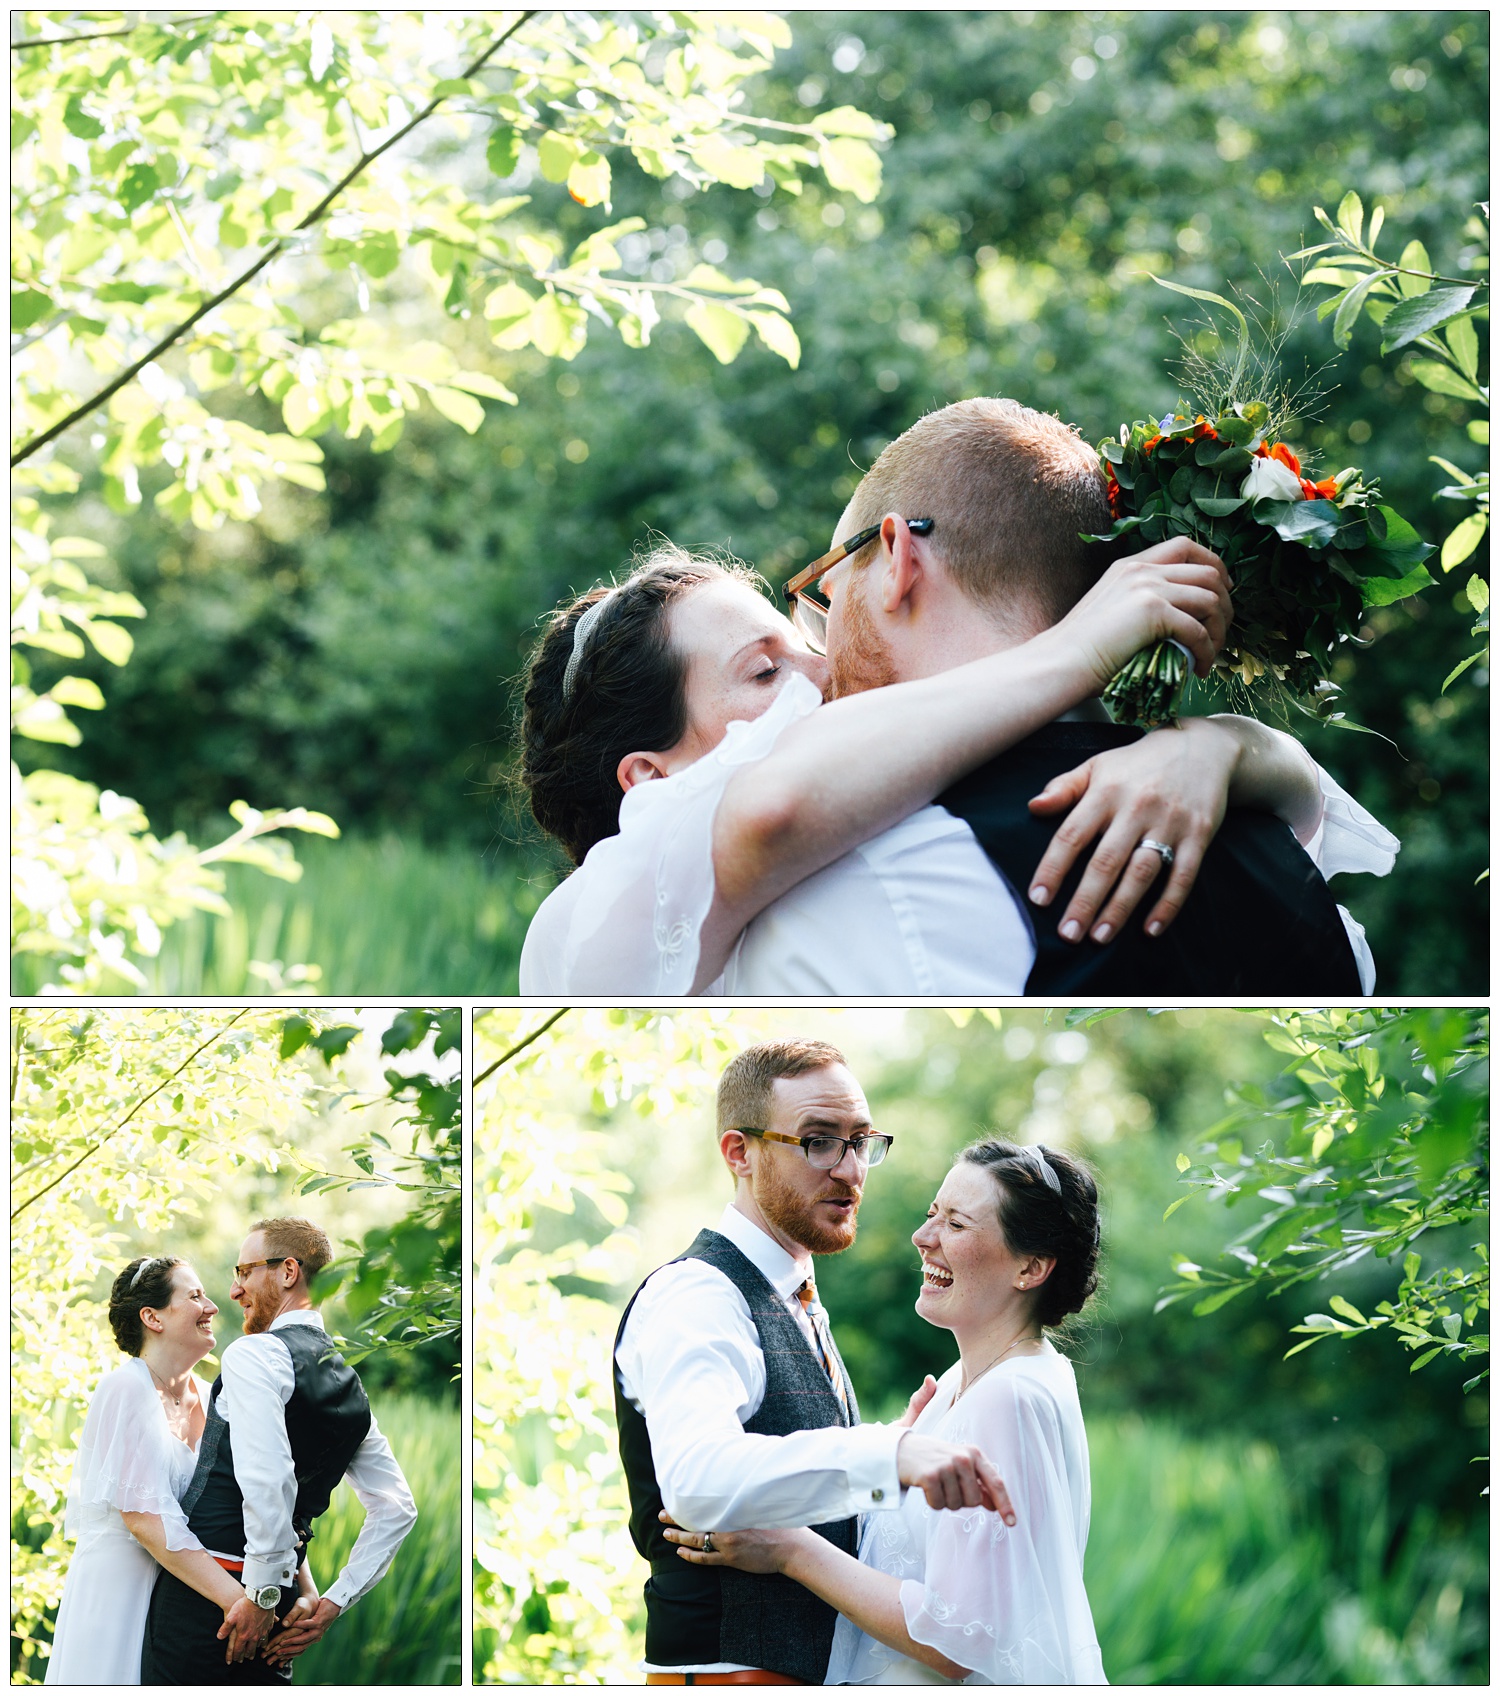 Some wedding portraits in the grounds of The Kench Hill Centre. They kiss, the bride grabs her husband's bum and they laugh.